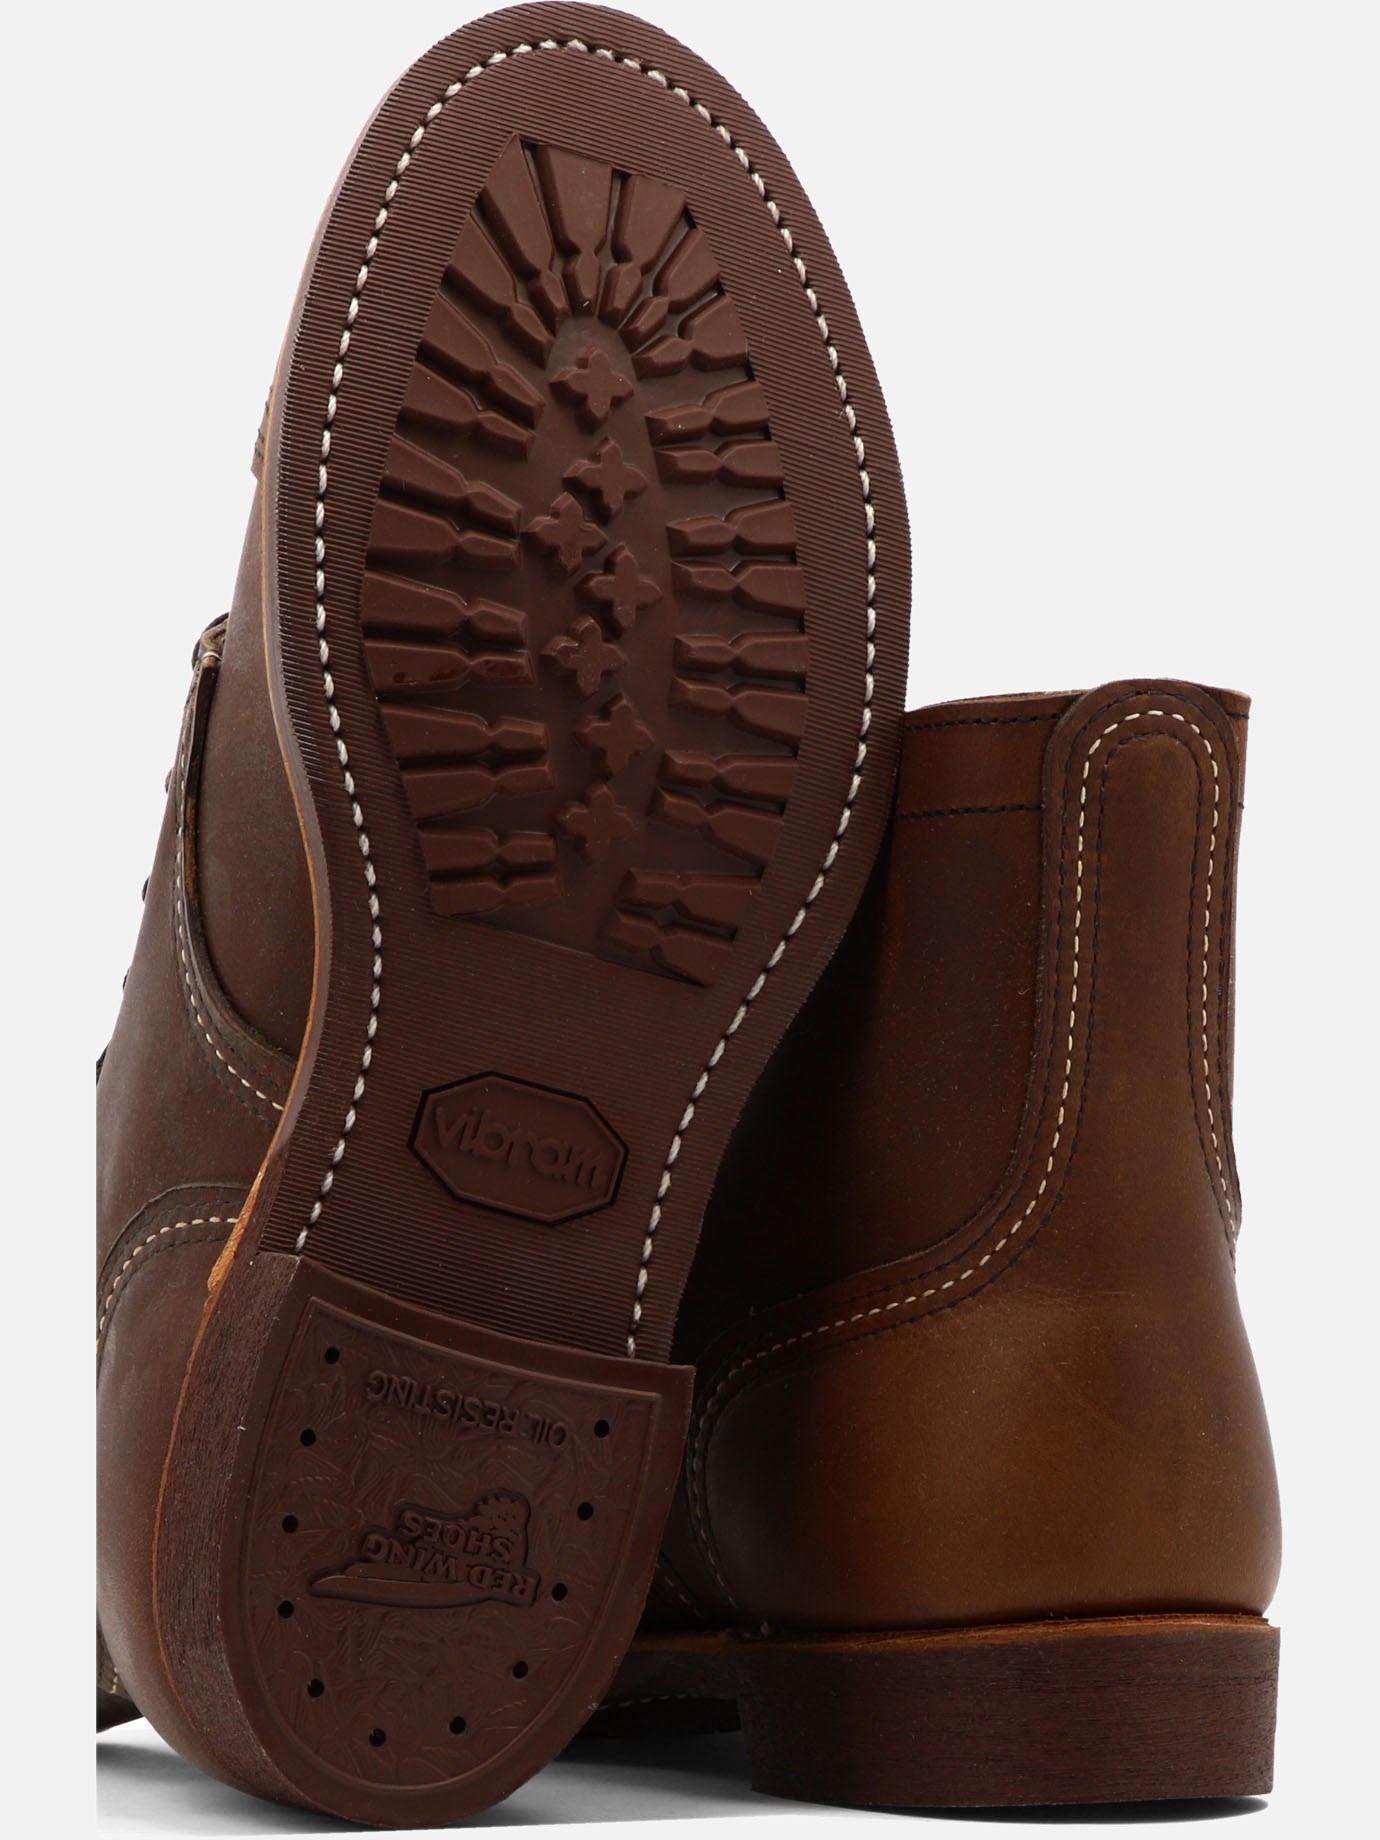  Iron Ranger  ankle boots by Red Wing Shoes